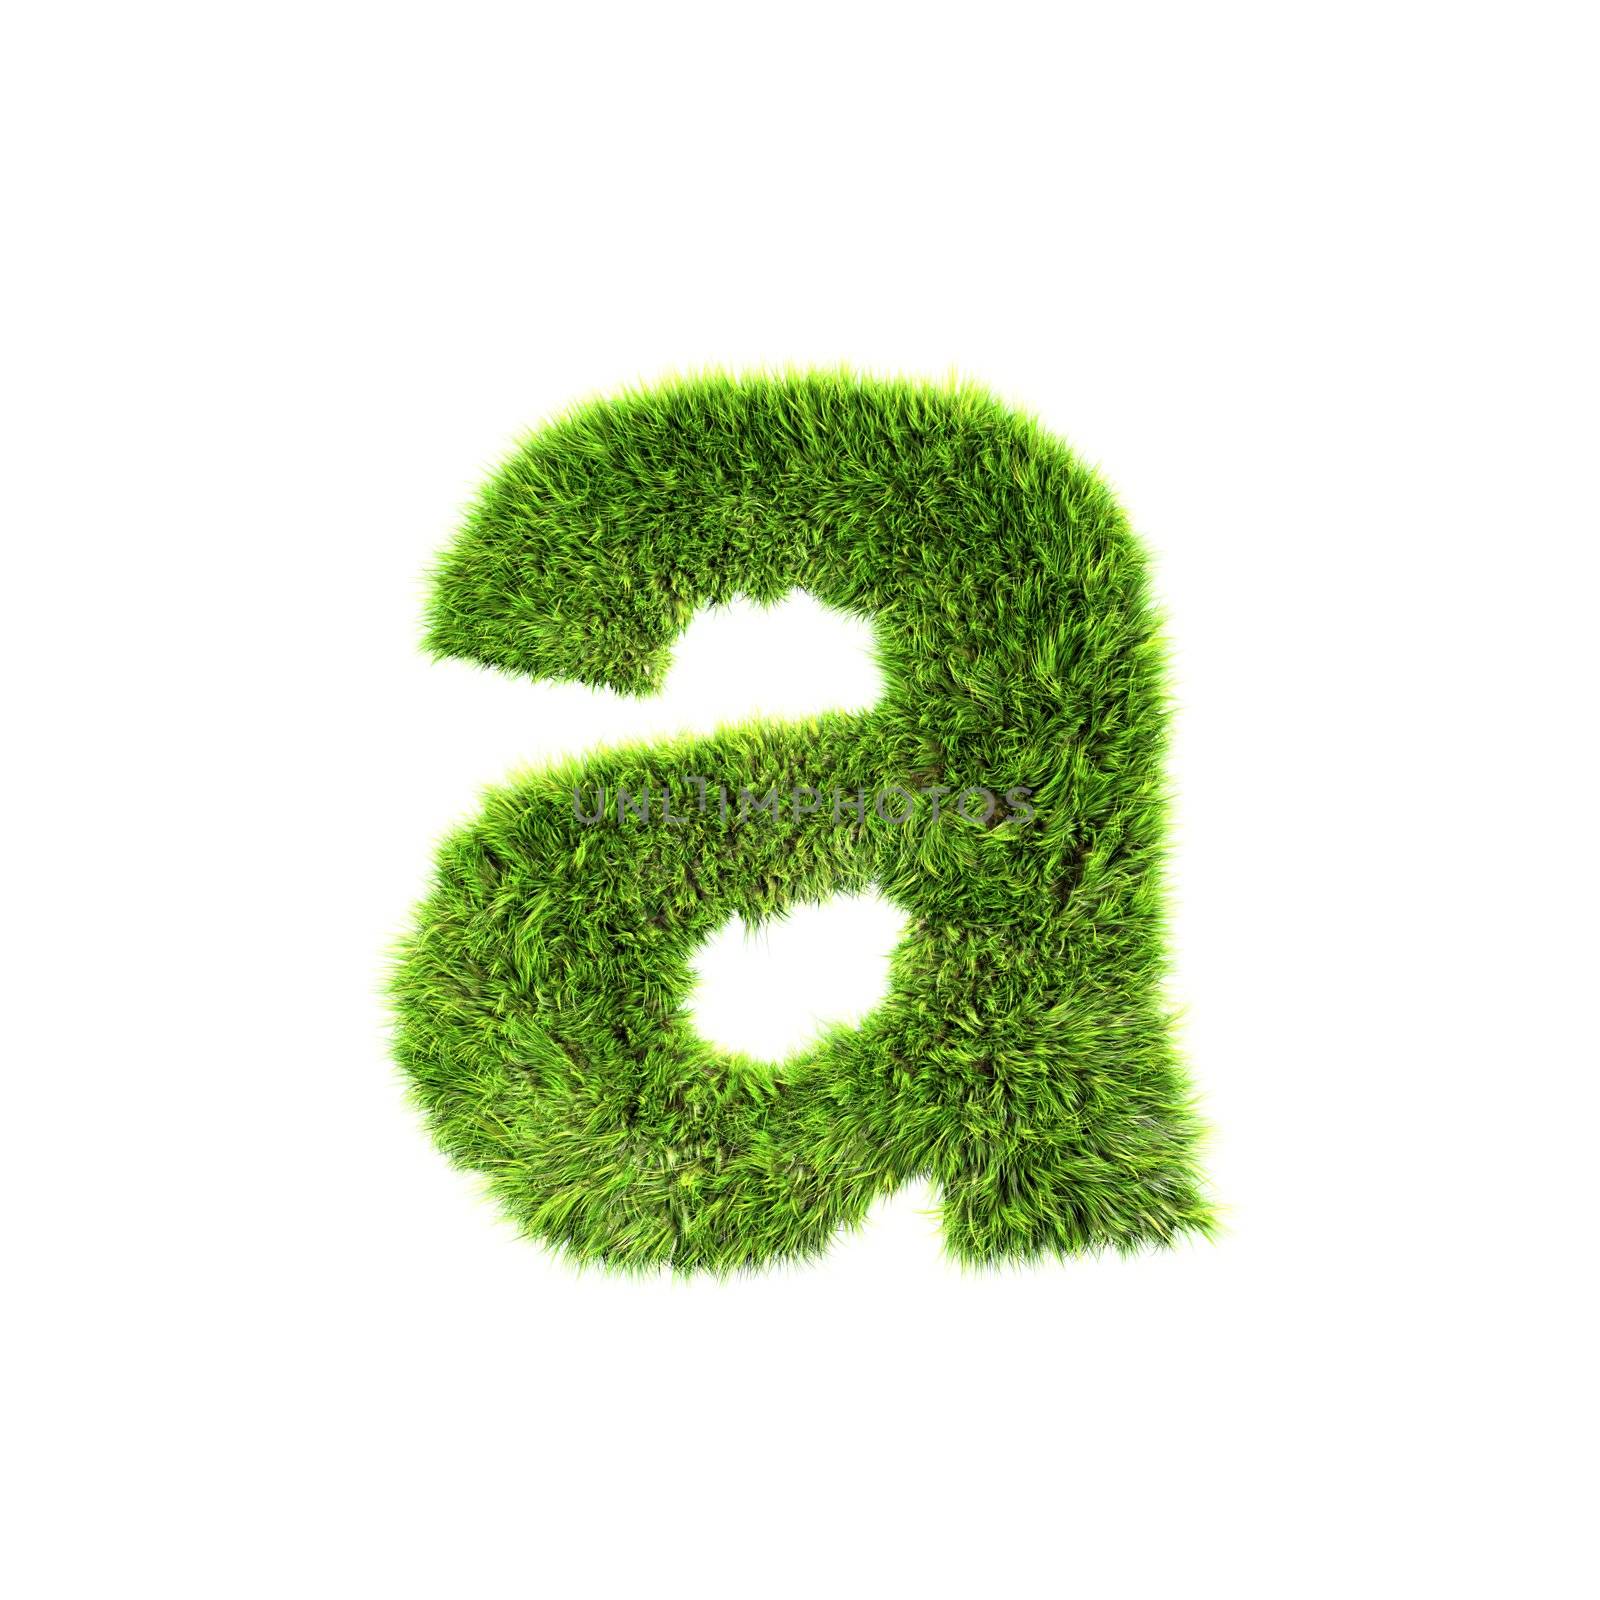 3d grass letter isolated on white background - a